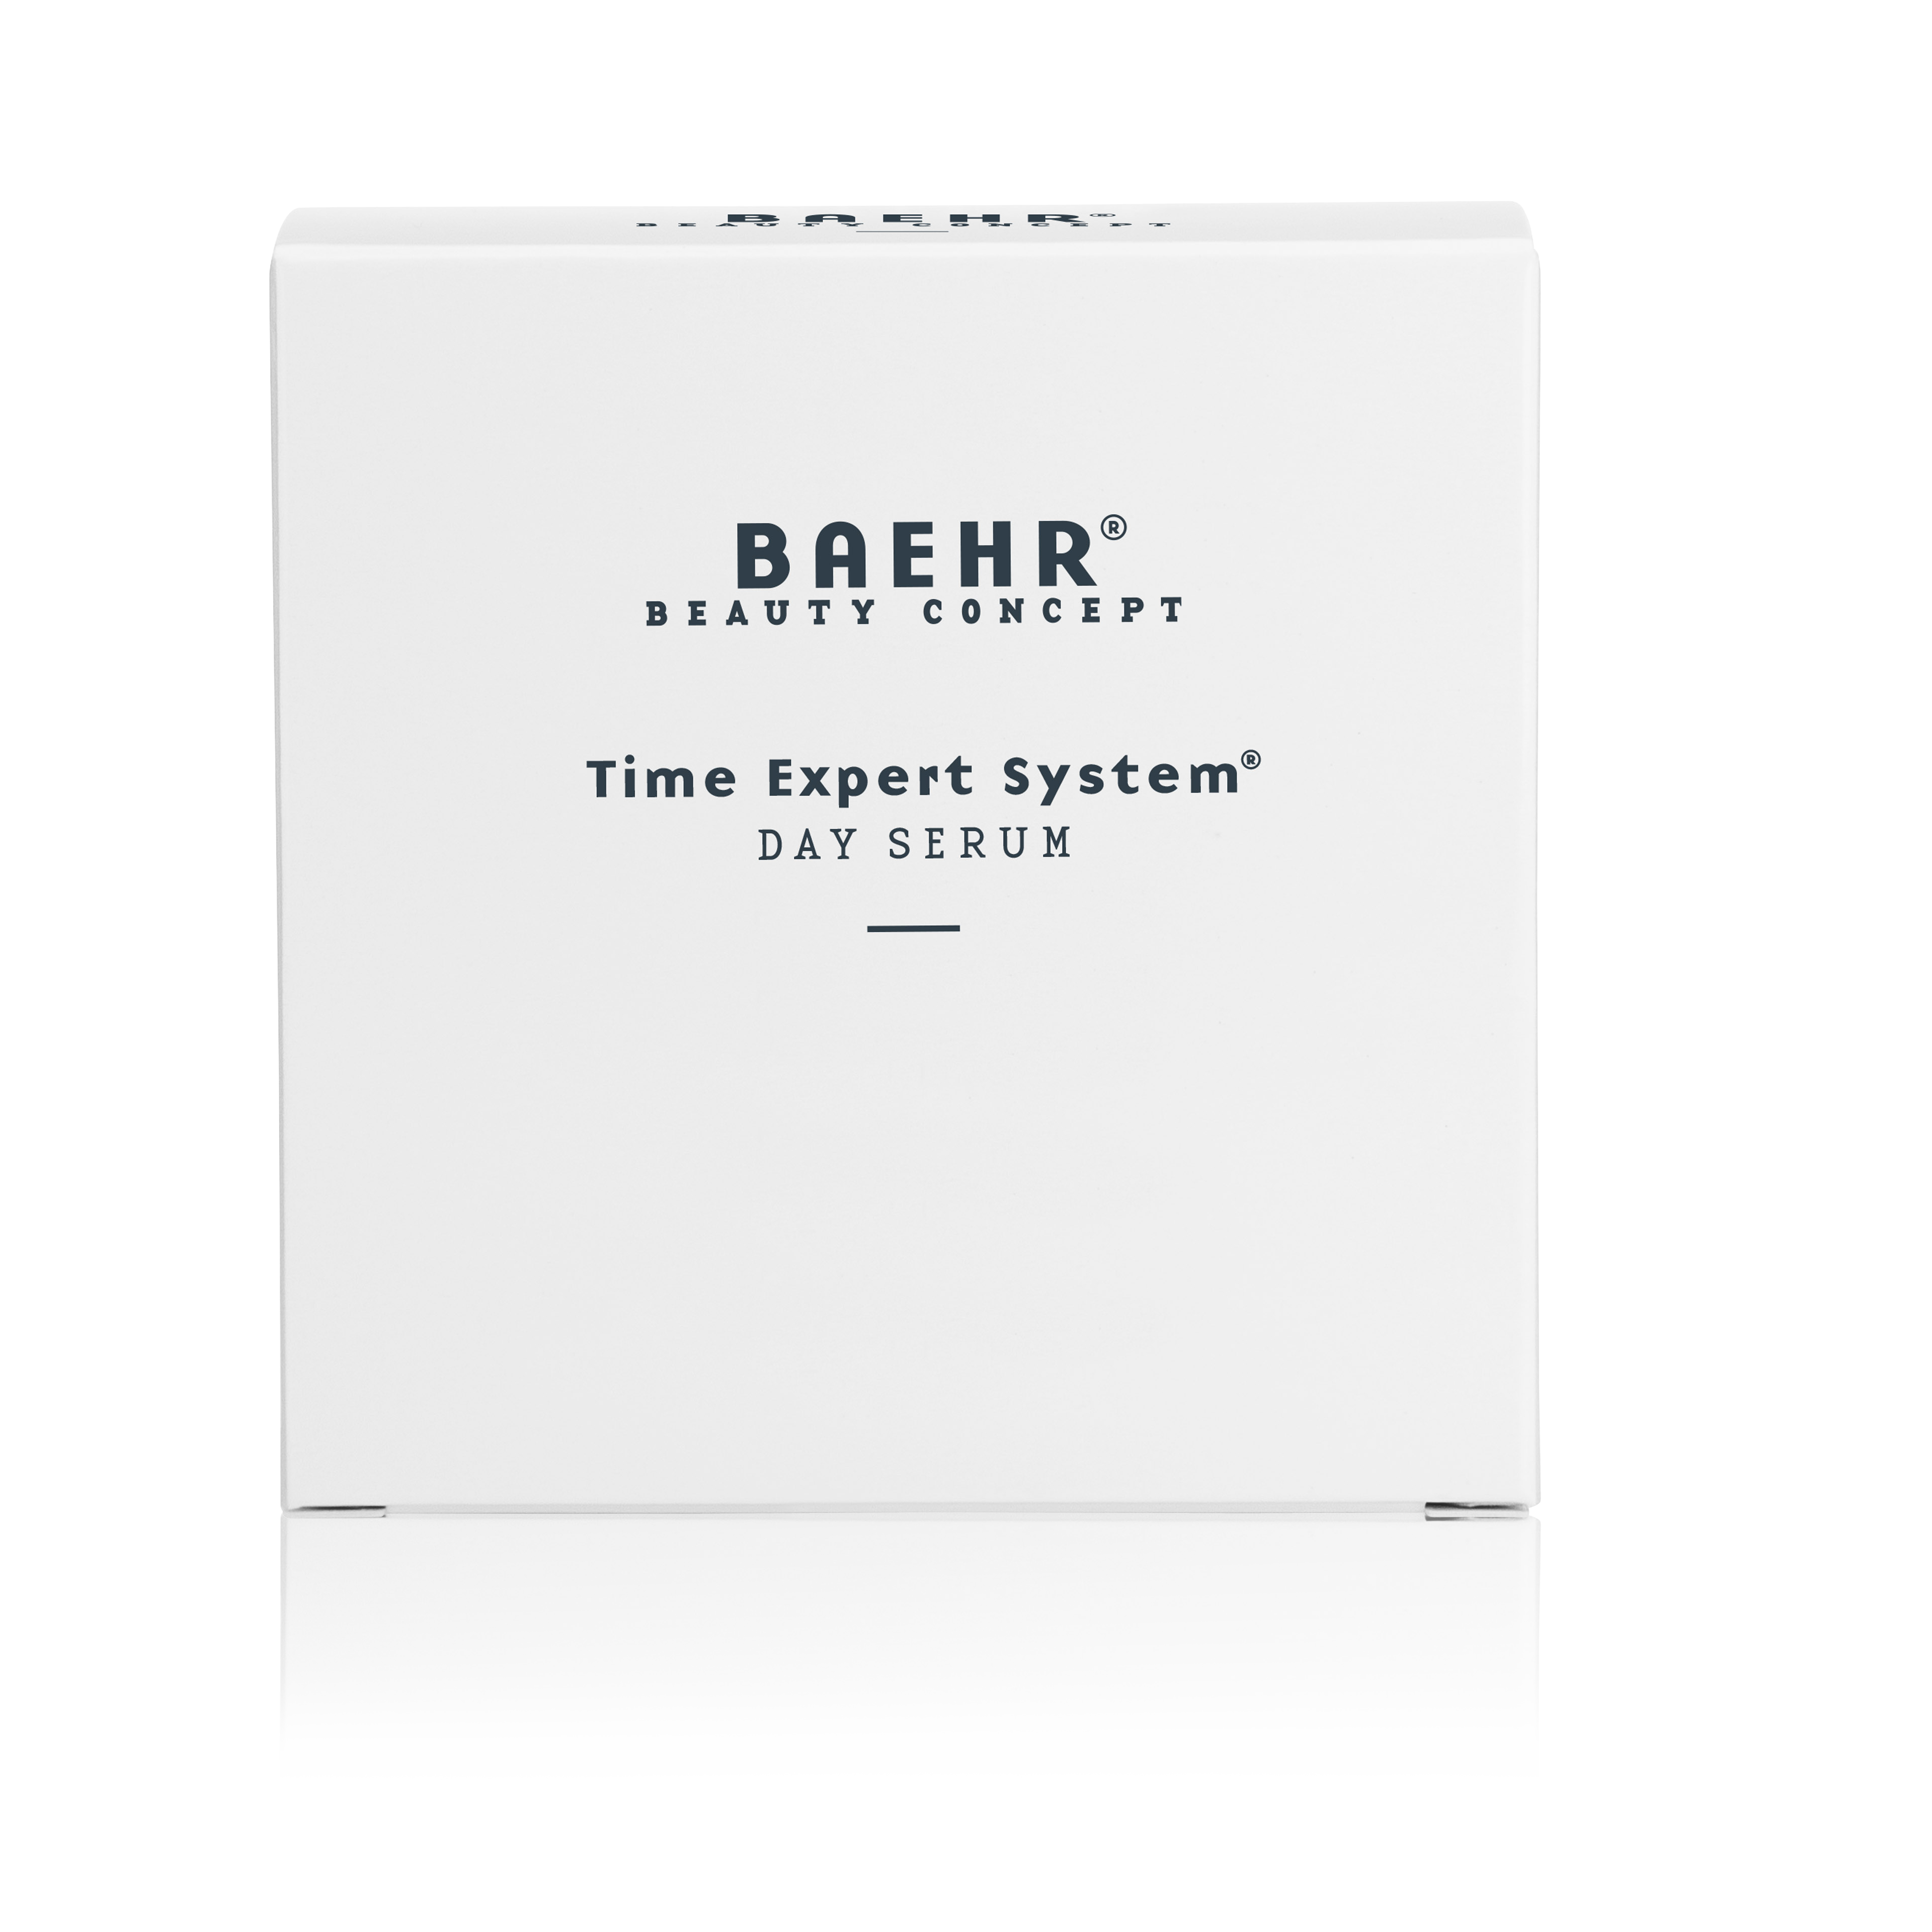 time-expert-system--day-serum_25227_2